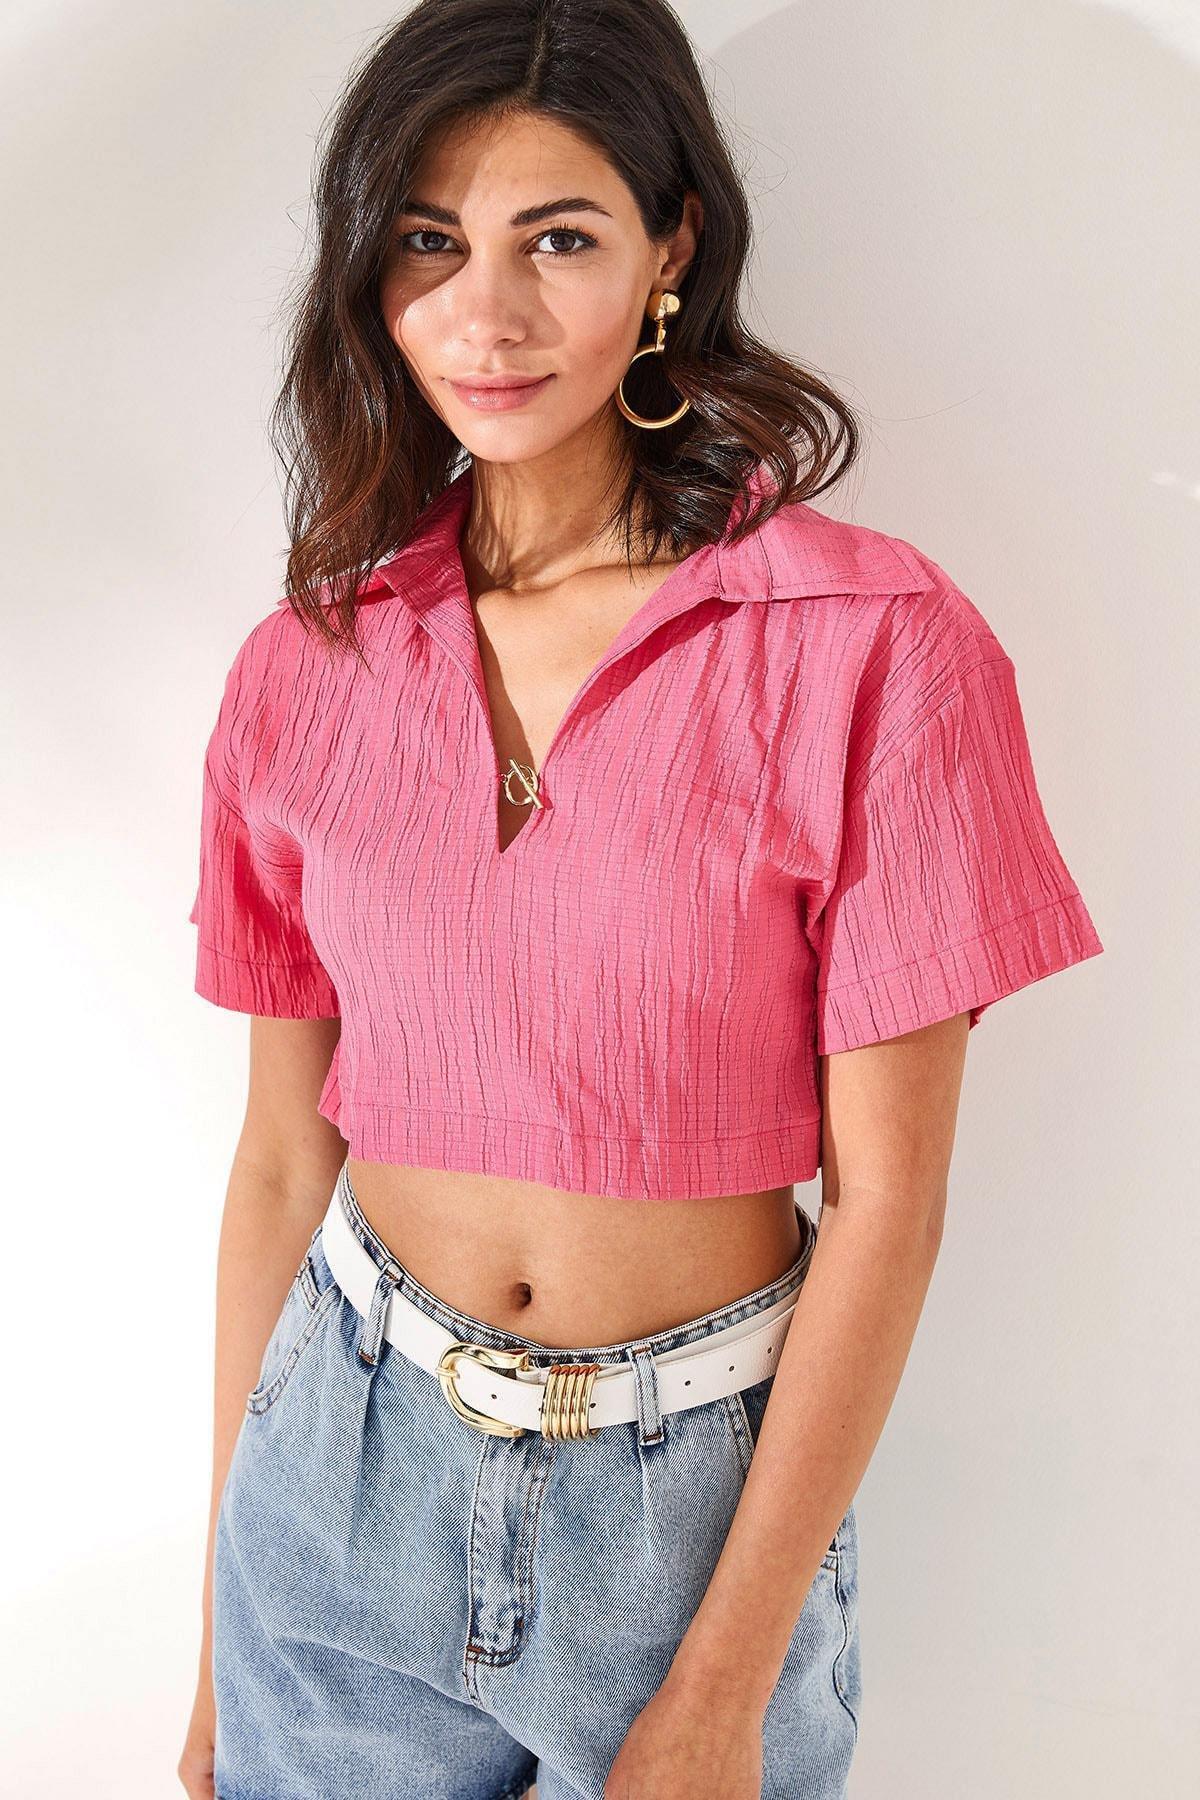 Olalook - Pink Fitted Blouse